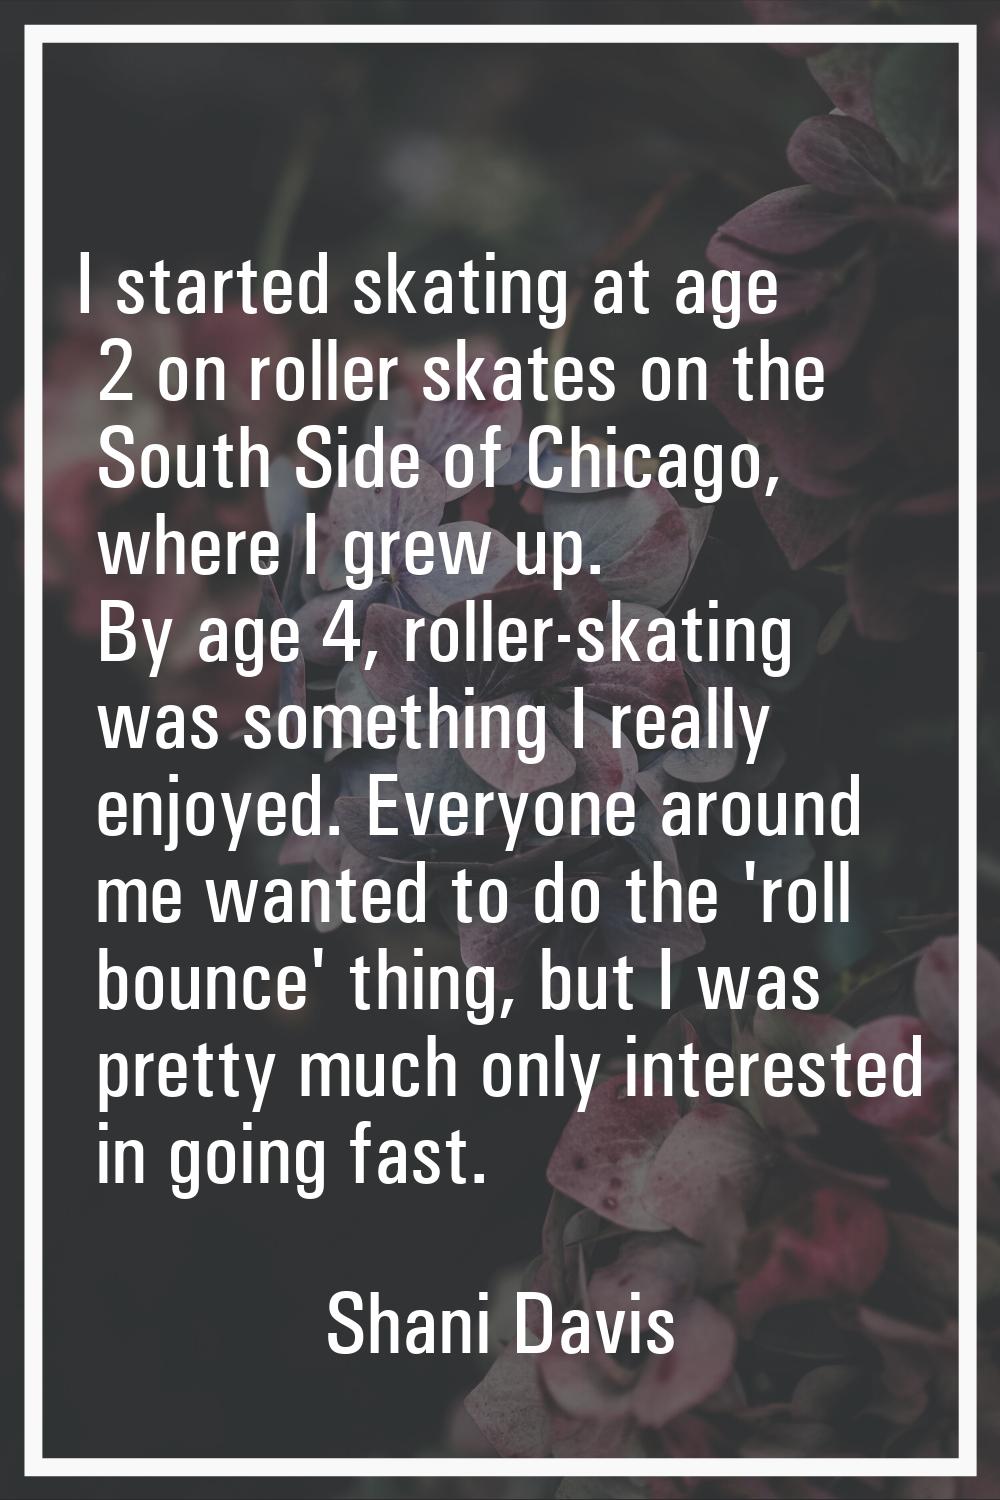 I started skating at age 2 on roller skates on the South Side of Chicago, where I grew up. By age 4